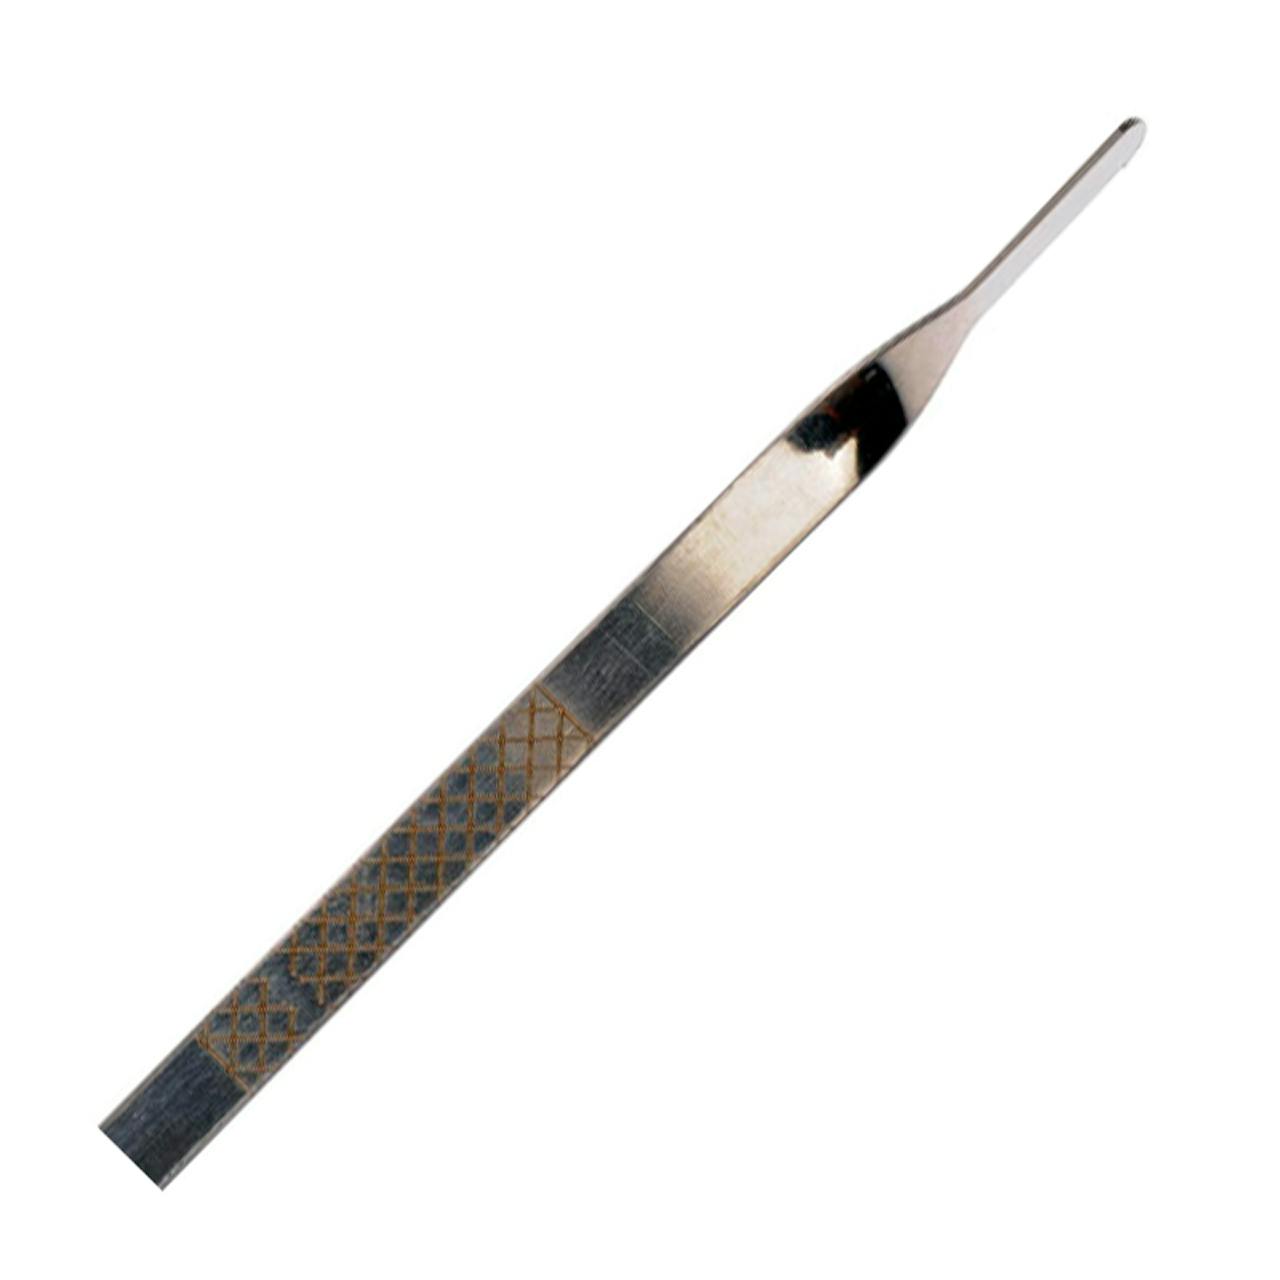 Oil Level Dipstick, 1174.85 ABS Engine Oil Dipstick Replacement for 206 207  307 with 1.4 HDi Engines